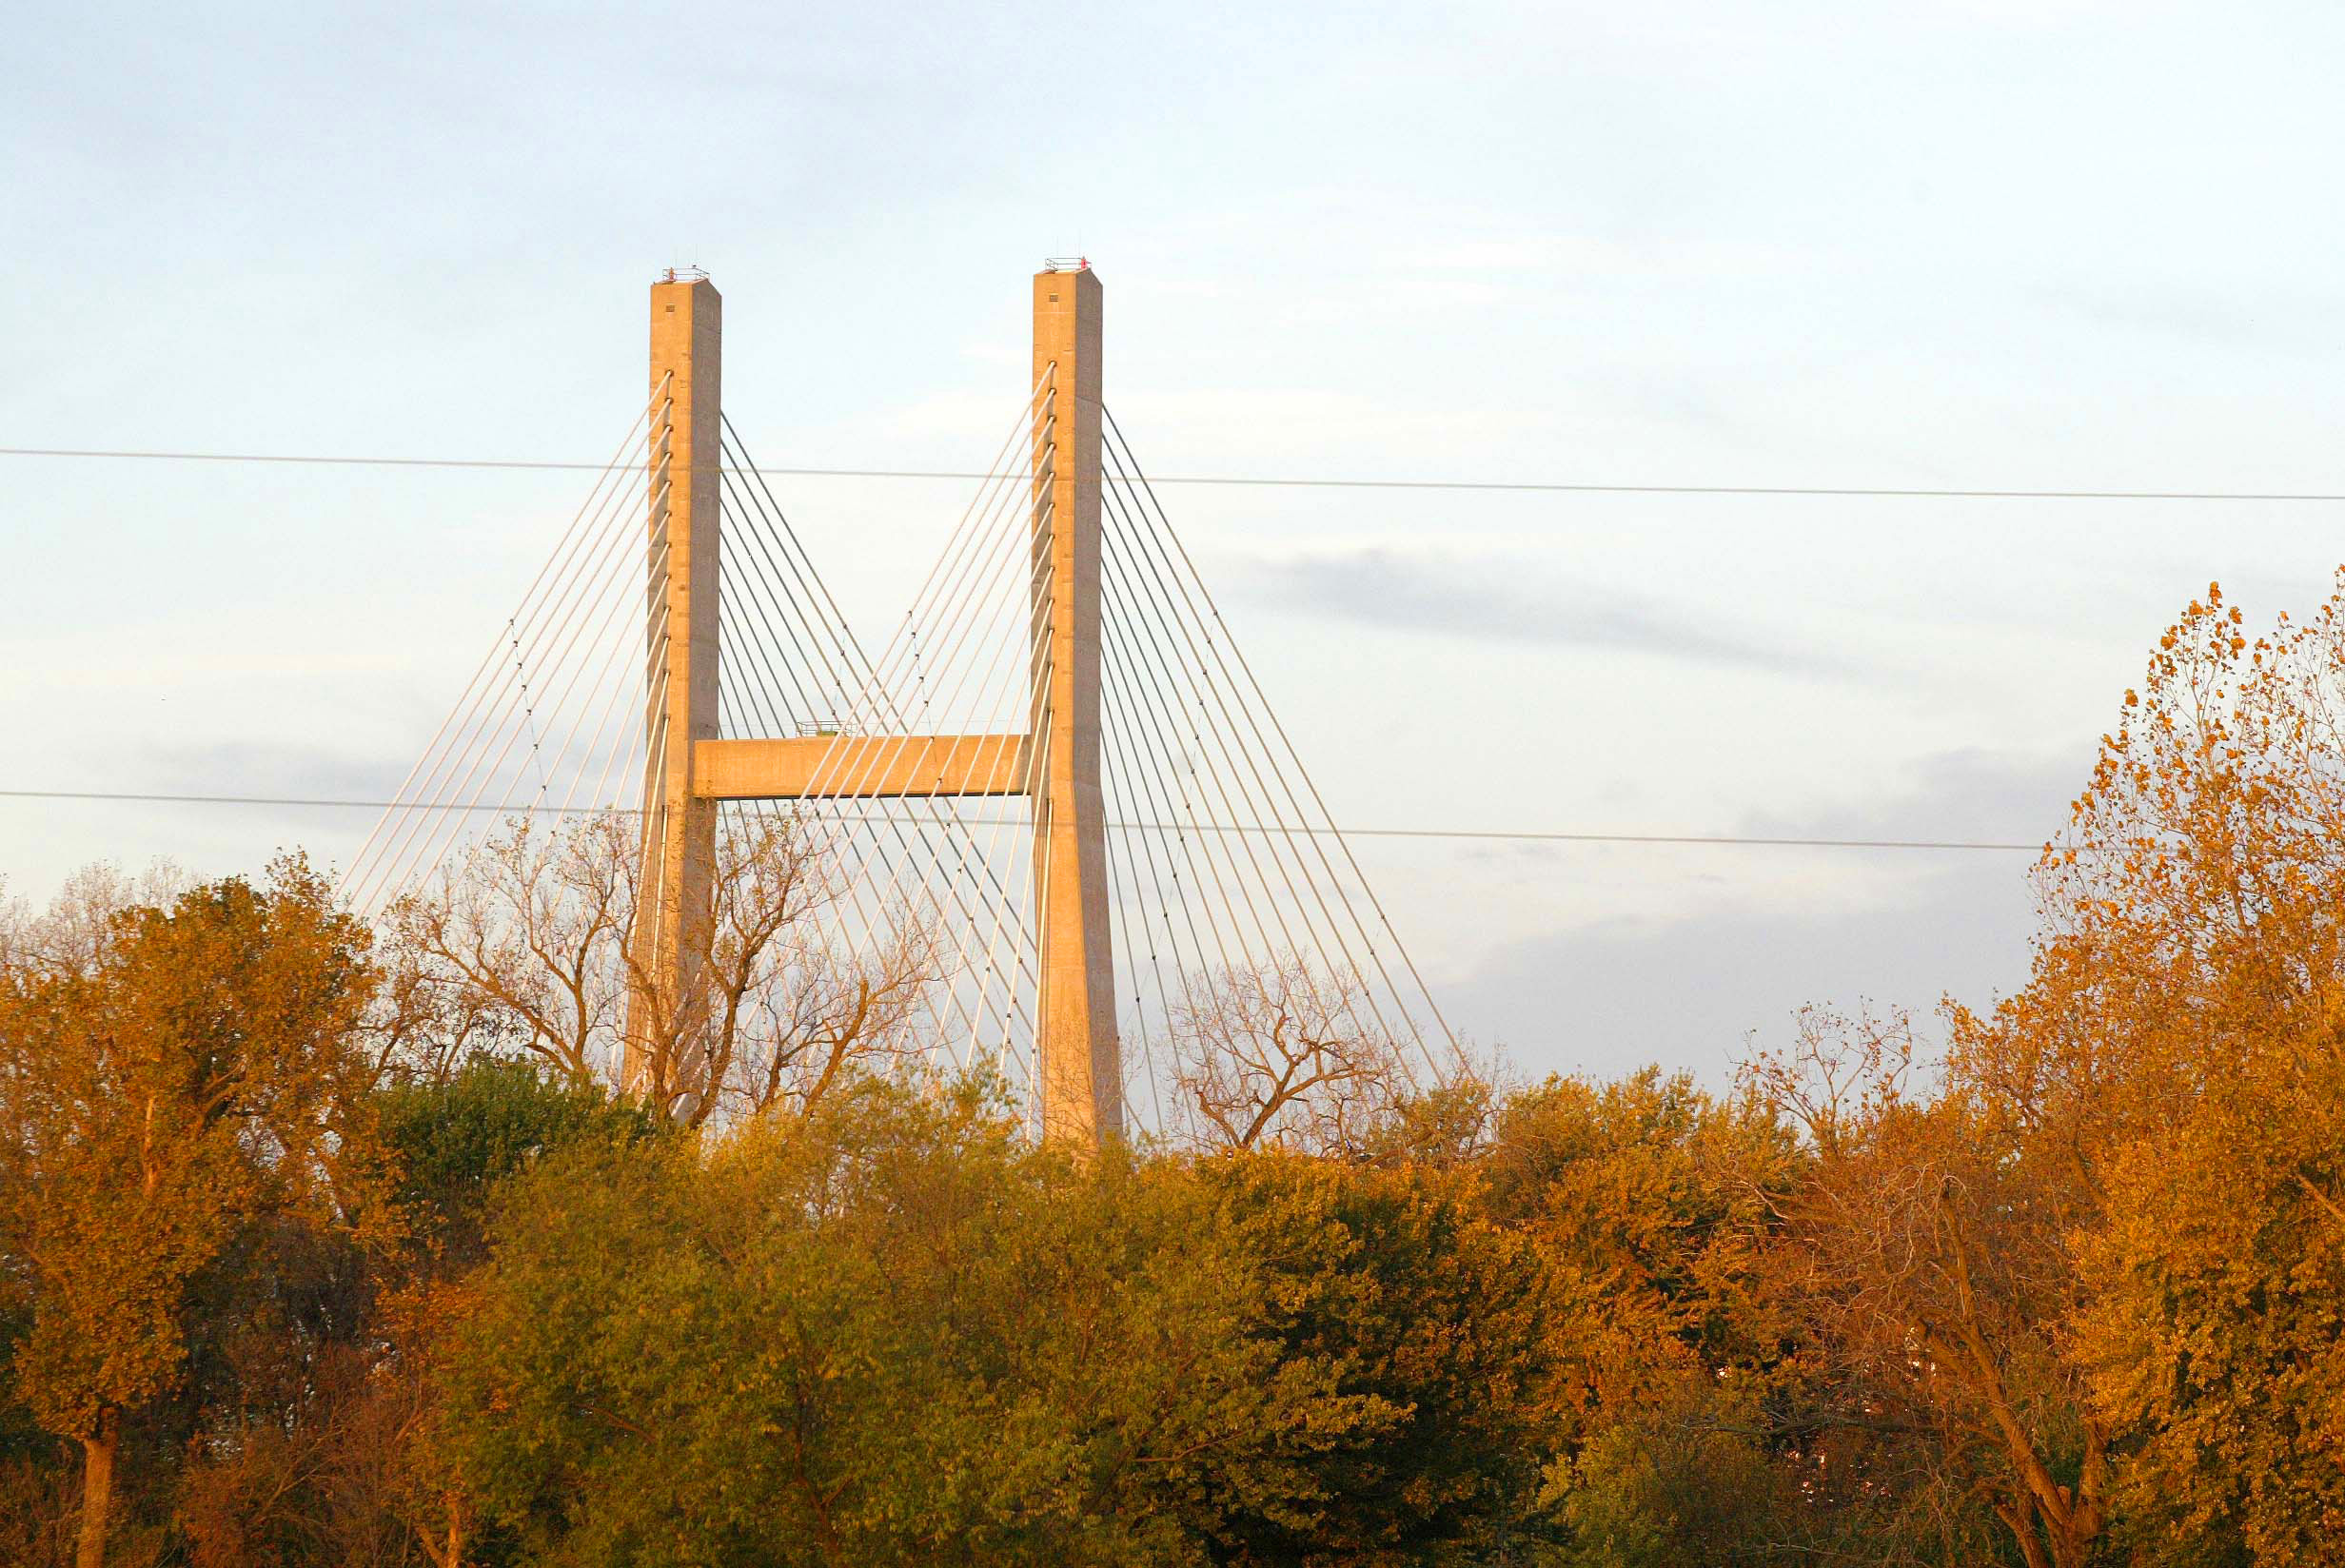 The Great River Bridge rises above the fall colors Oct. 20, 2003 looking to the west from Gulfport, Illinois. | John Gaines | The Hawk Eye